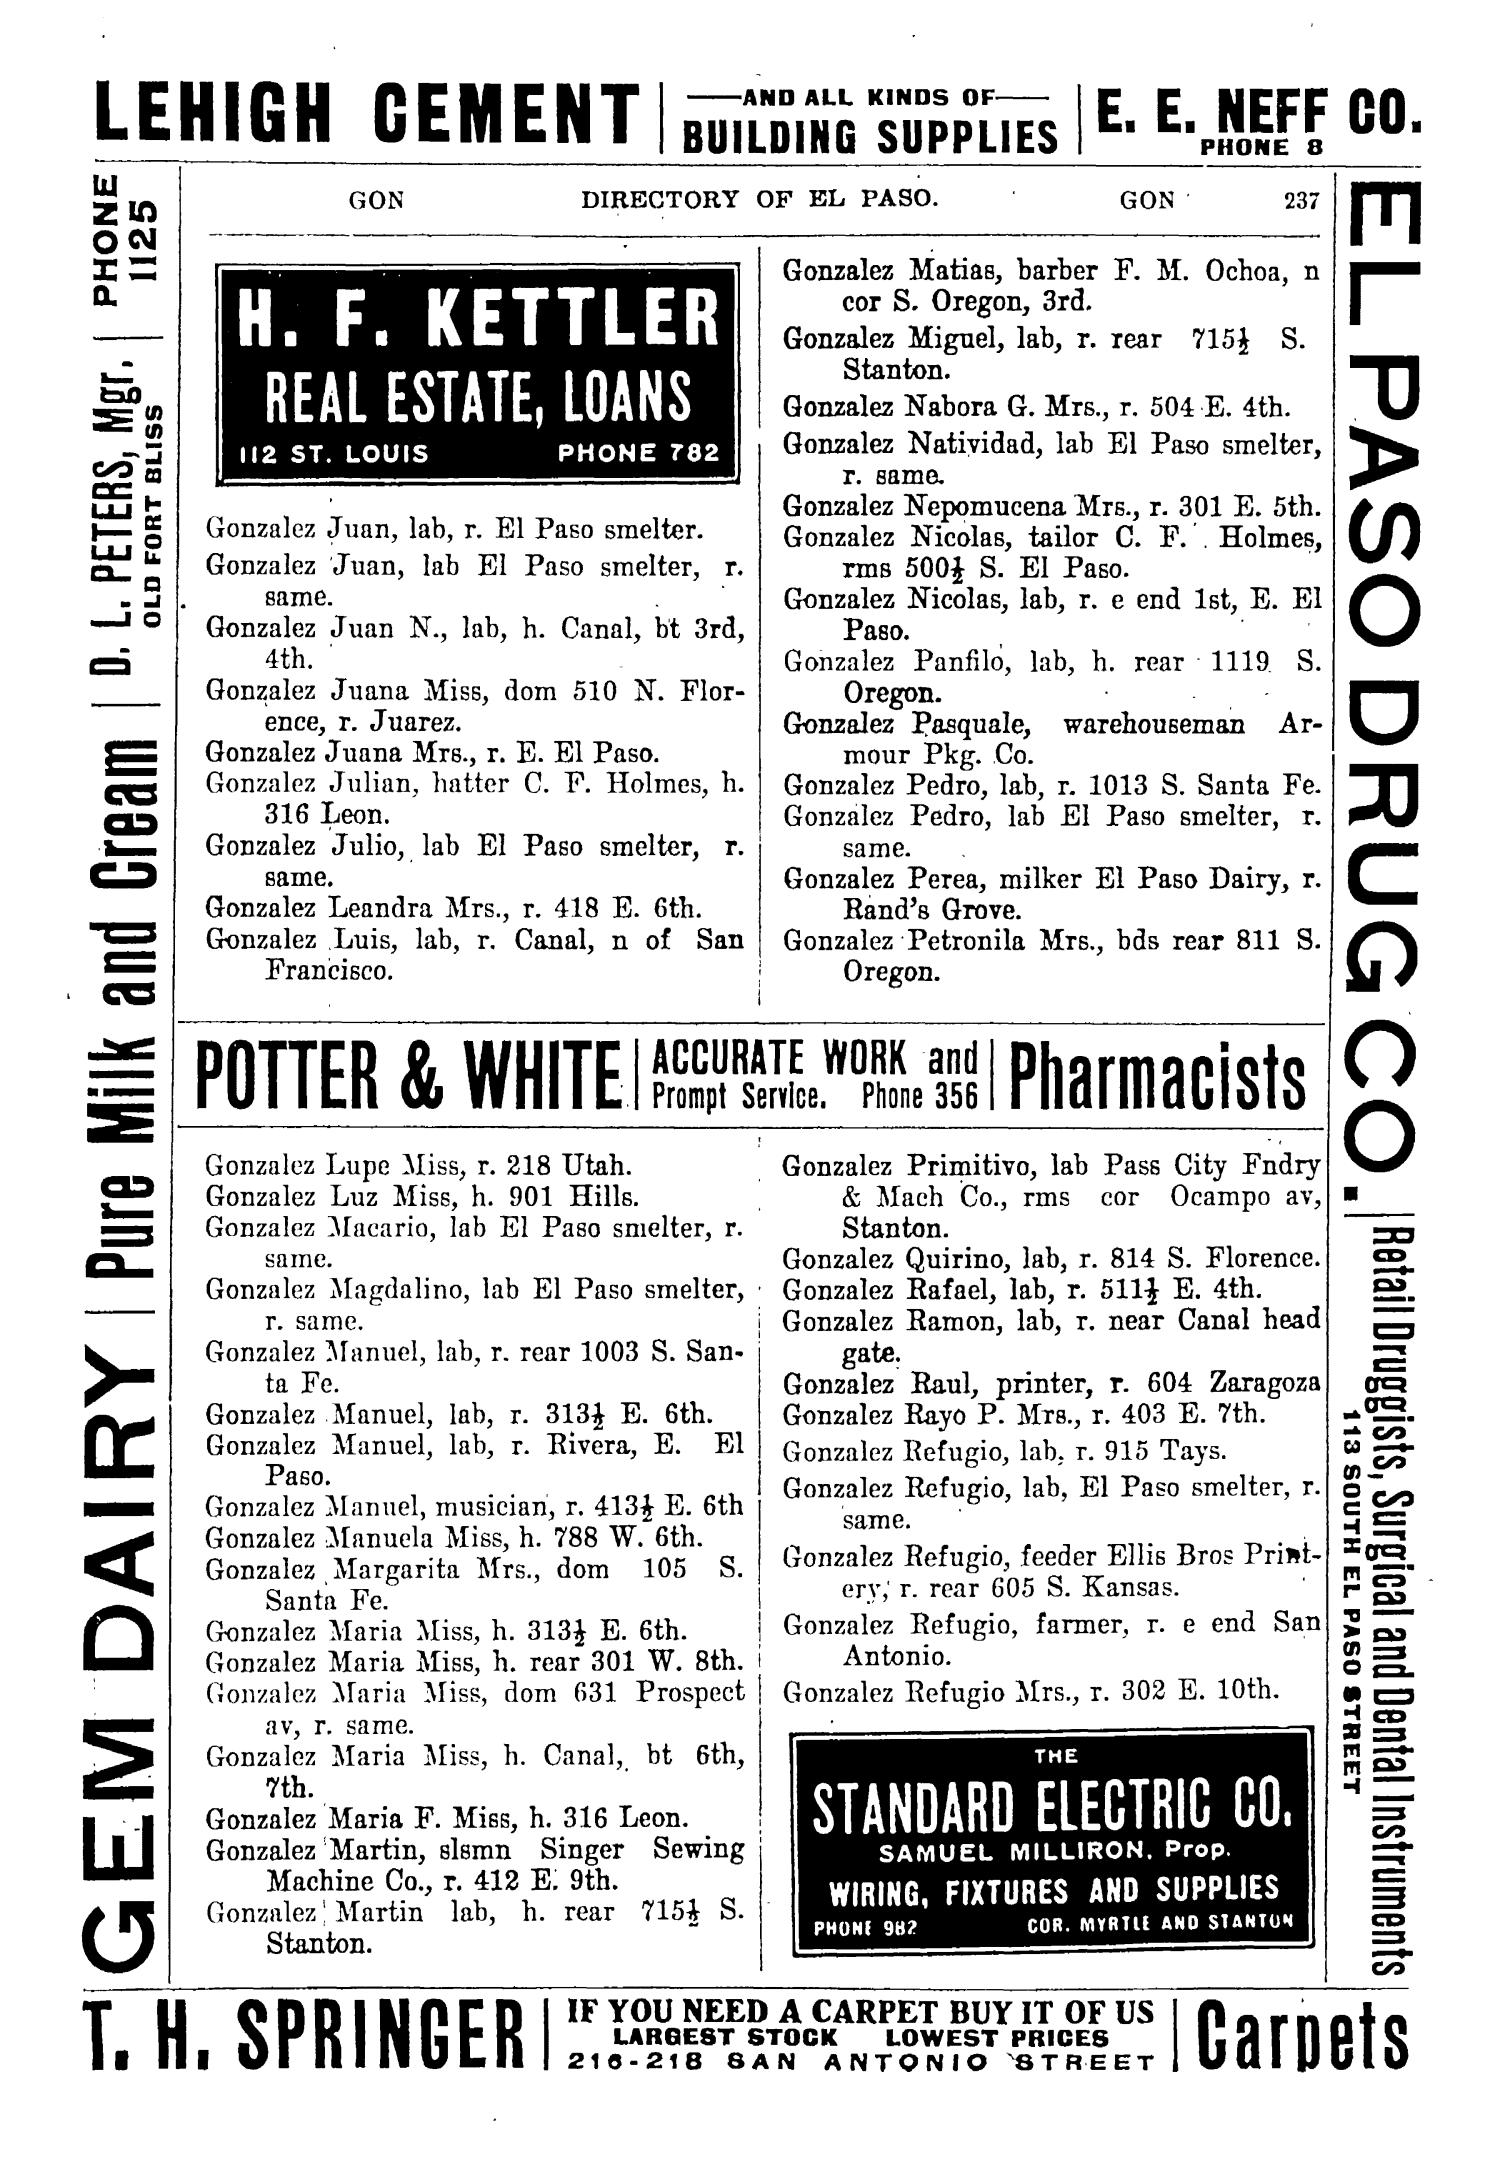 John F. Worley & Co.'s El Paso Directory for 1906
                                                
                                                    237
                                                